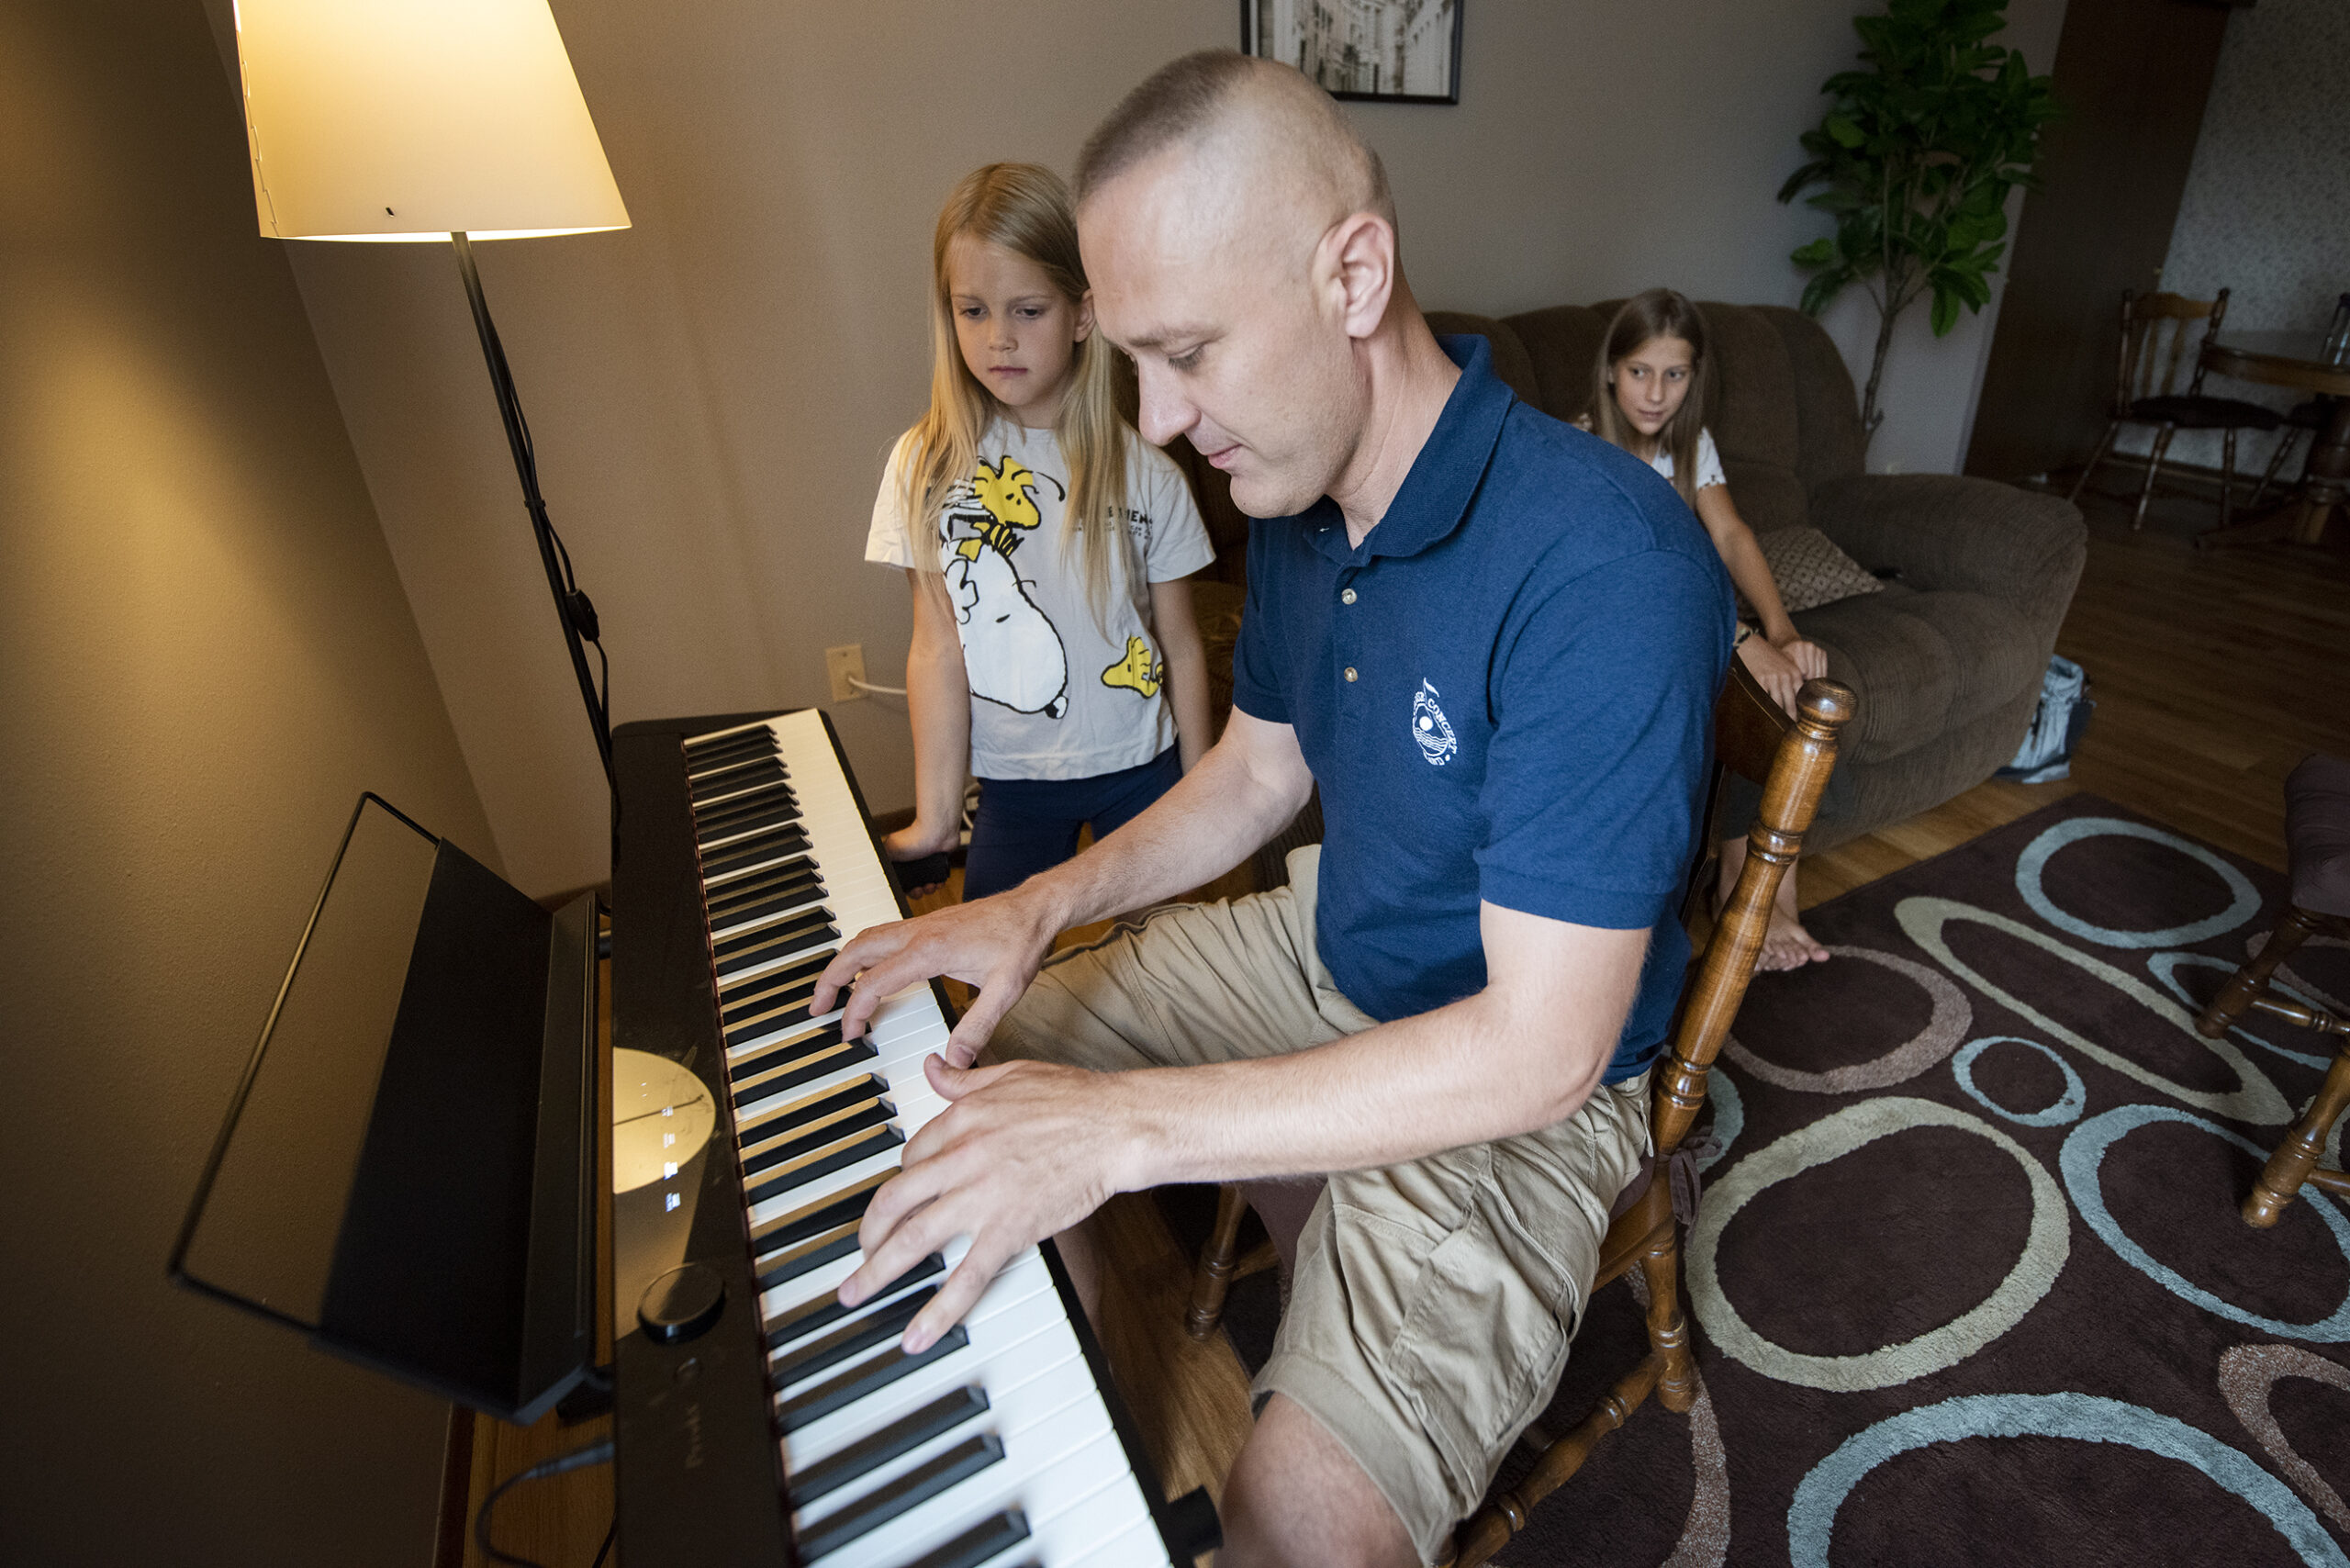 Peter Sokor plays a keyboard as his daughters watch.